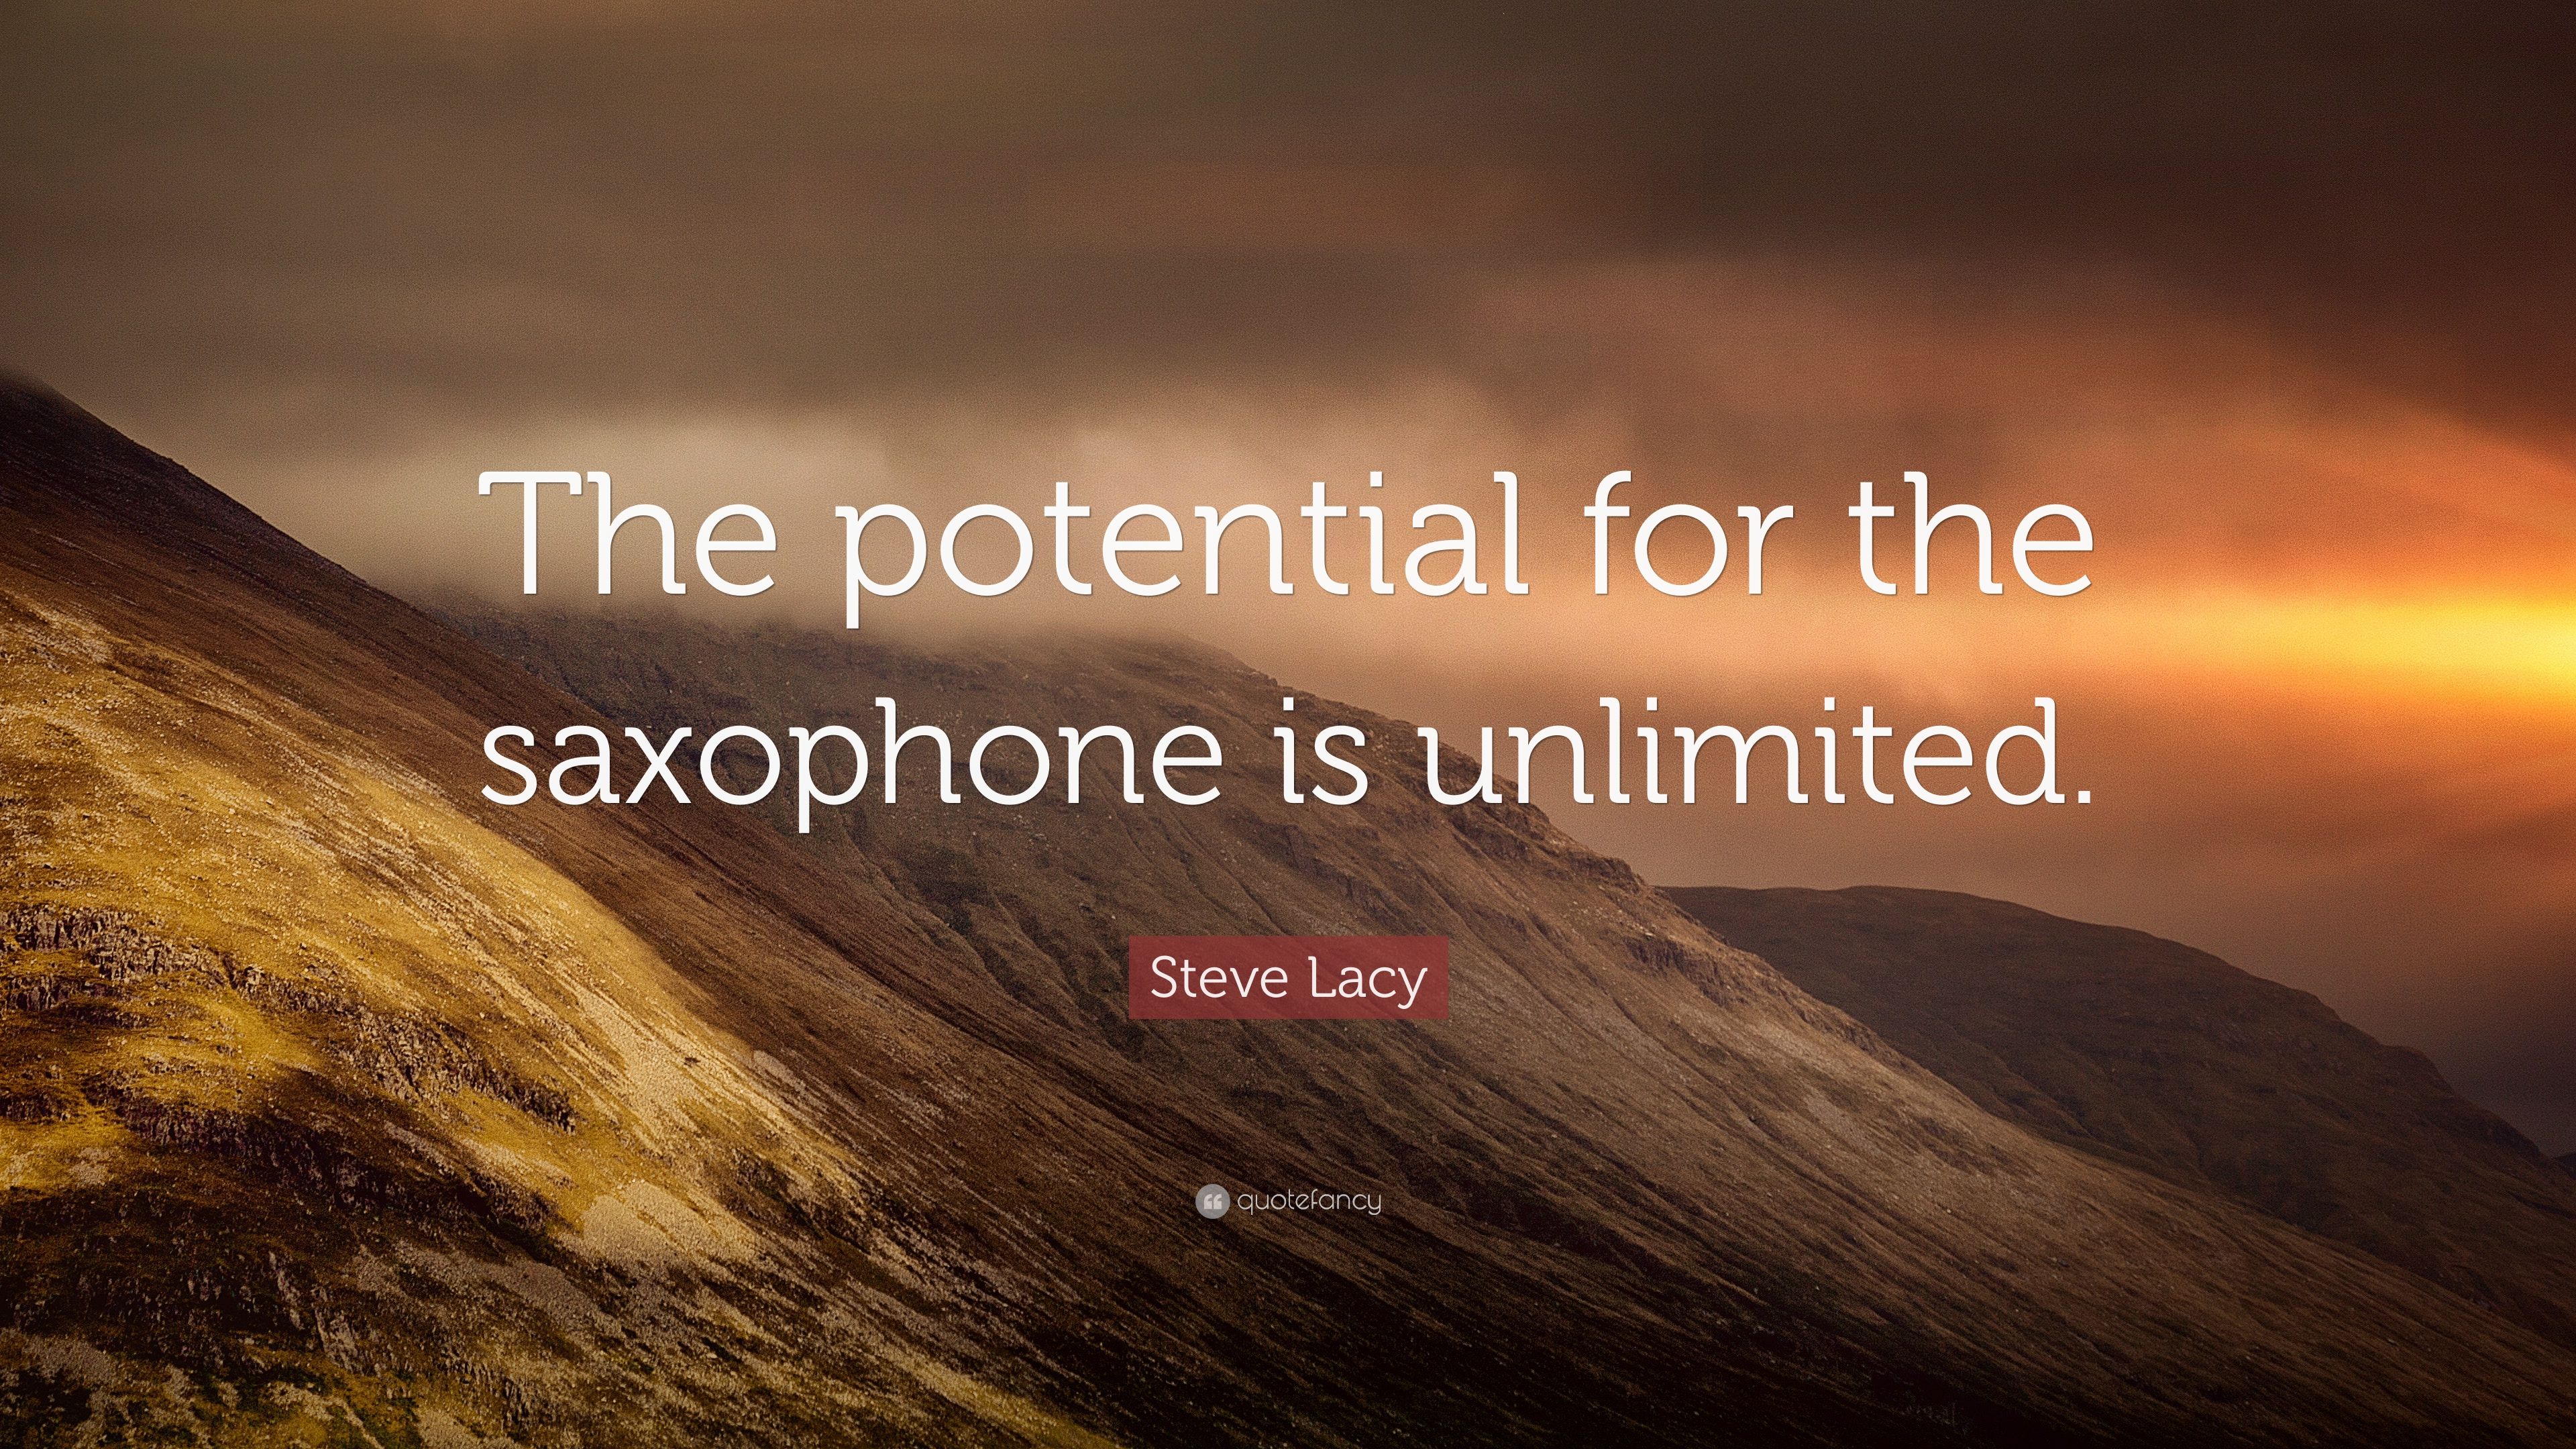 Steve Lacy Quote: “The potential for the saxophone is unlimited.” 7